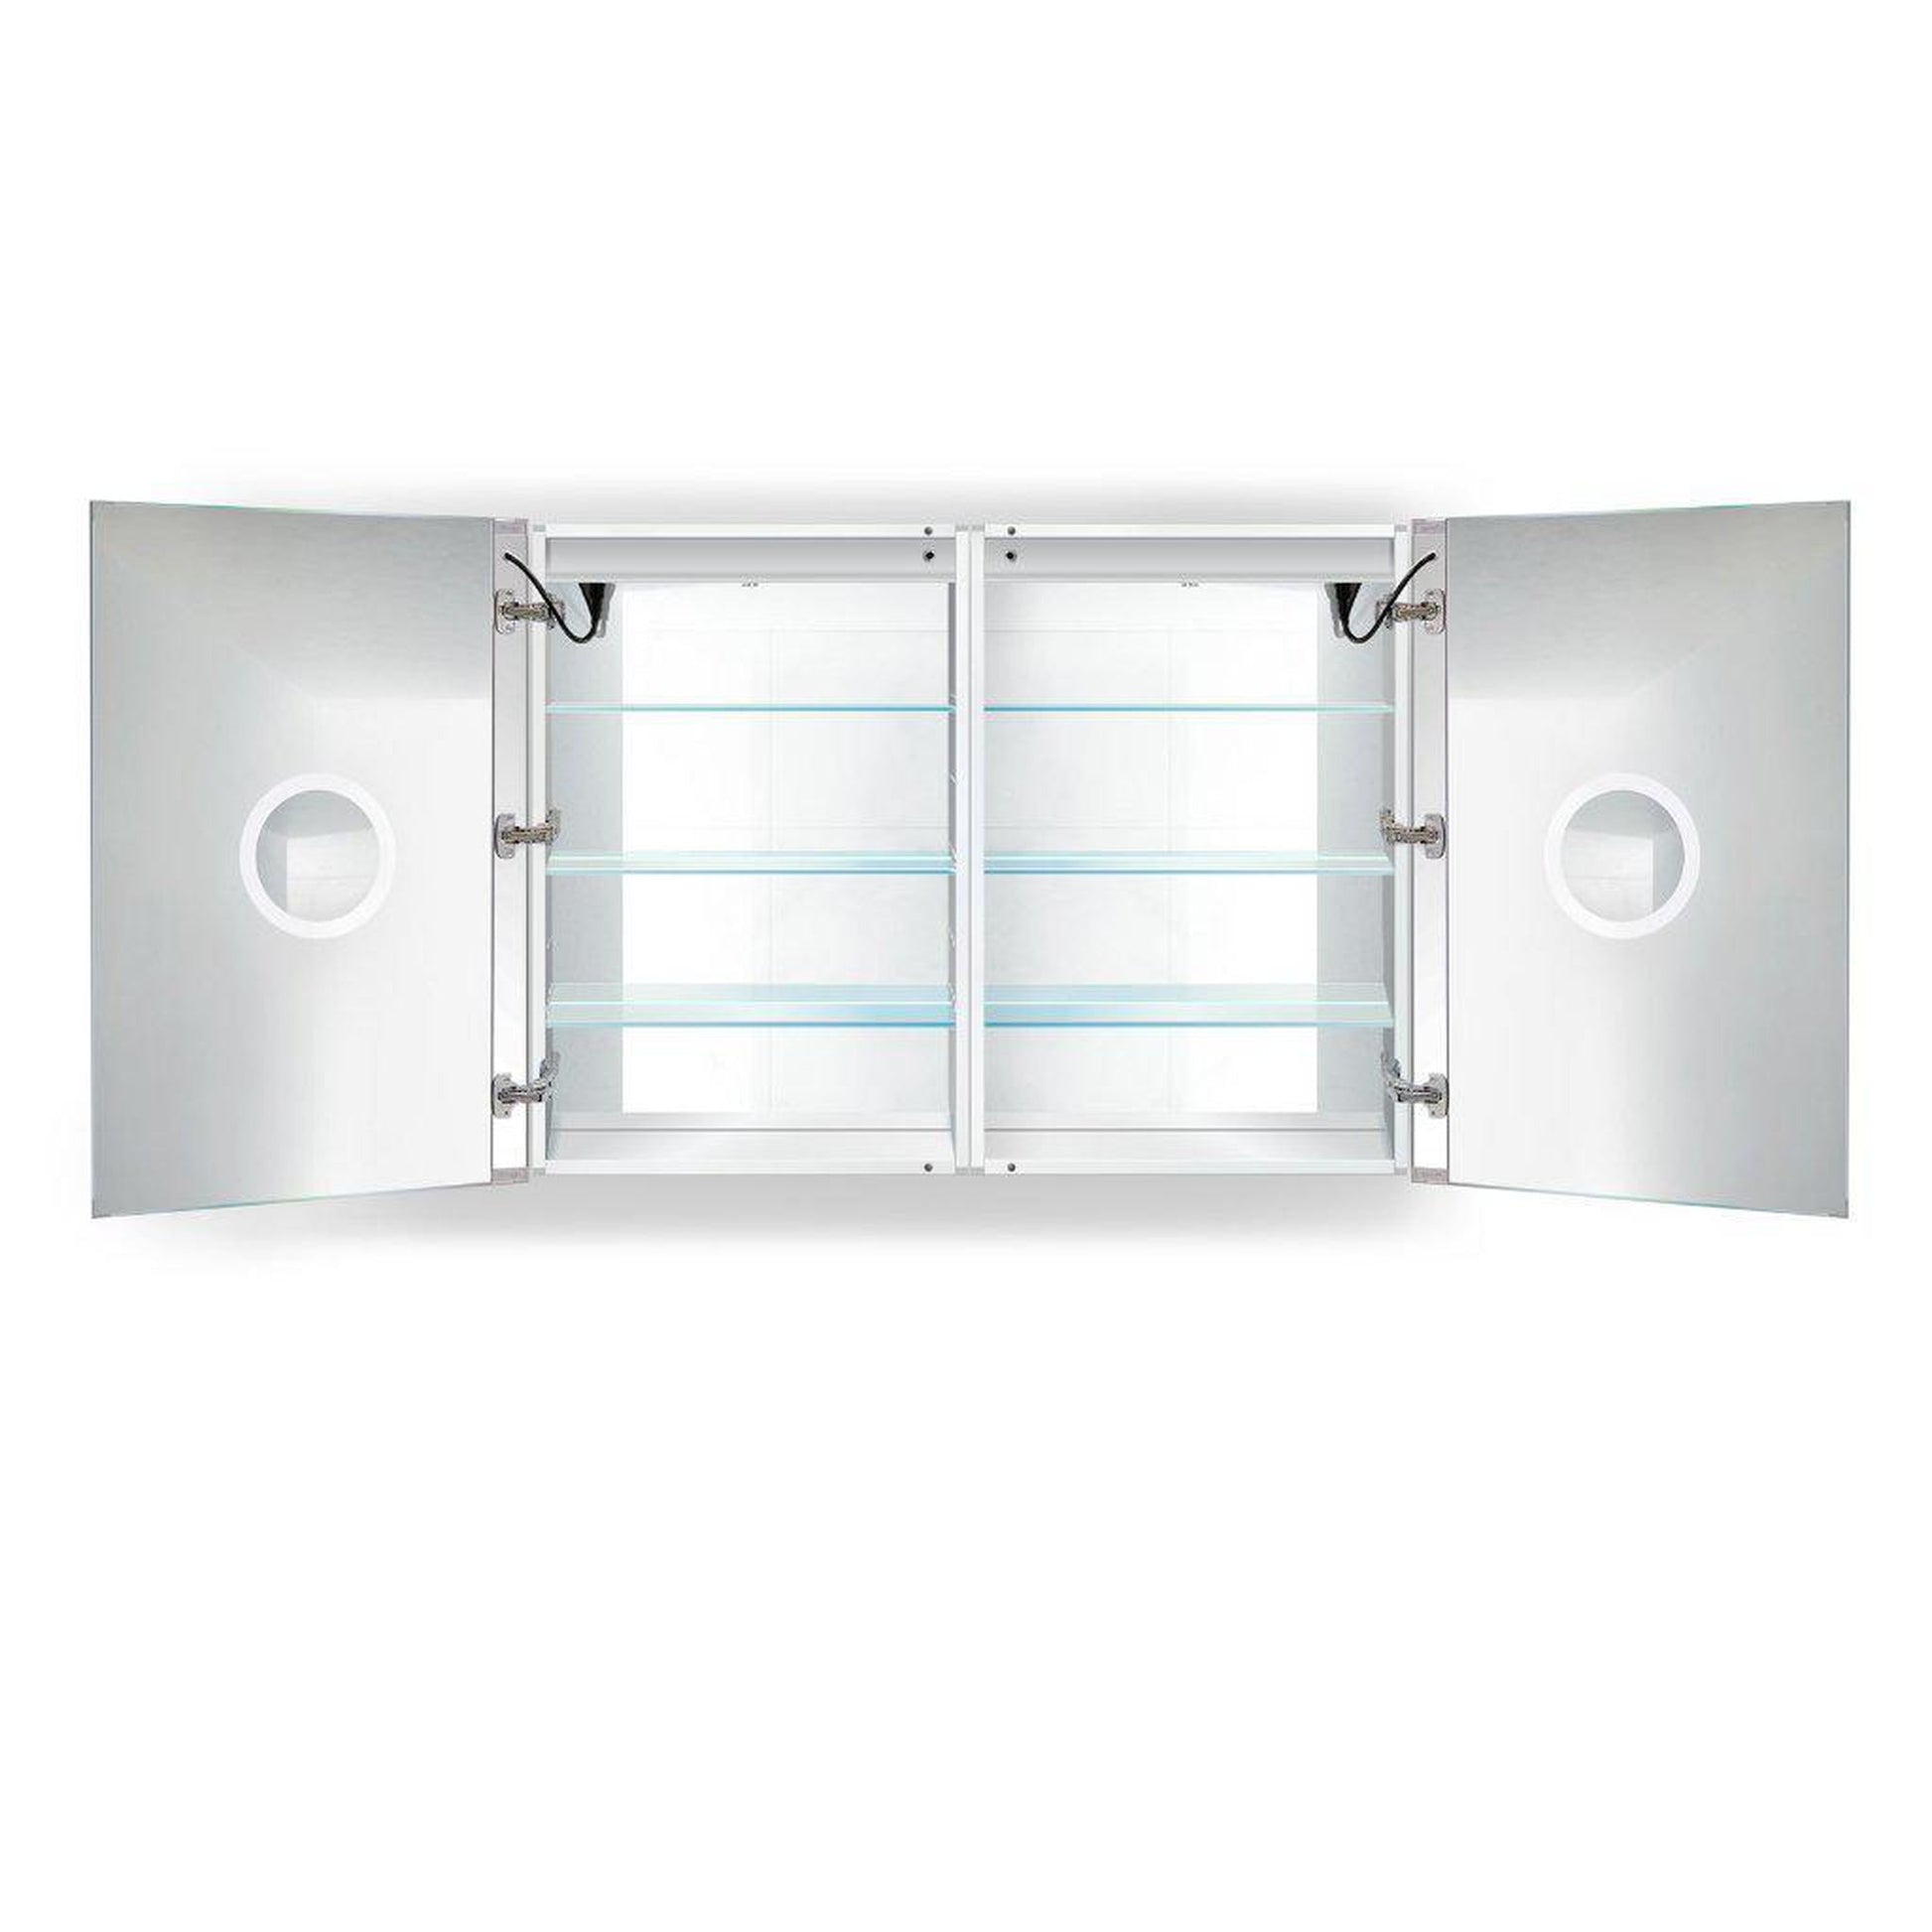 Krugg Reflections Svange 48" x 36" 5000K Double Dual Opening Recessed/Surface-Mount Illuminated Silver Backed LED Medicine Cabinet Mirror With Built-in Defogger, Dimmer and Electrical Outlet